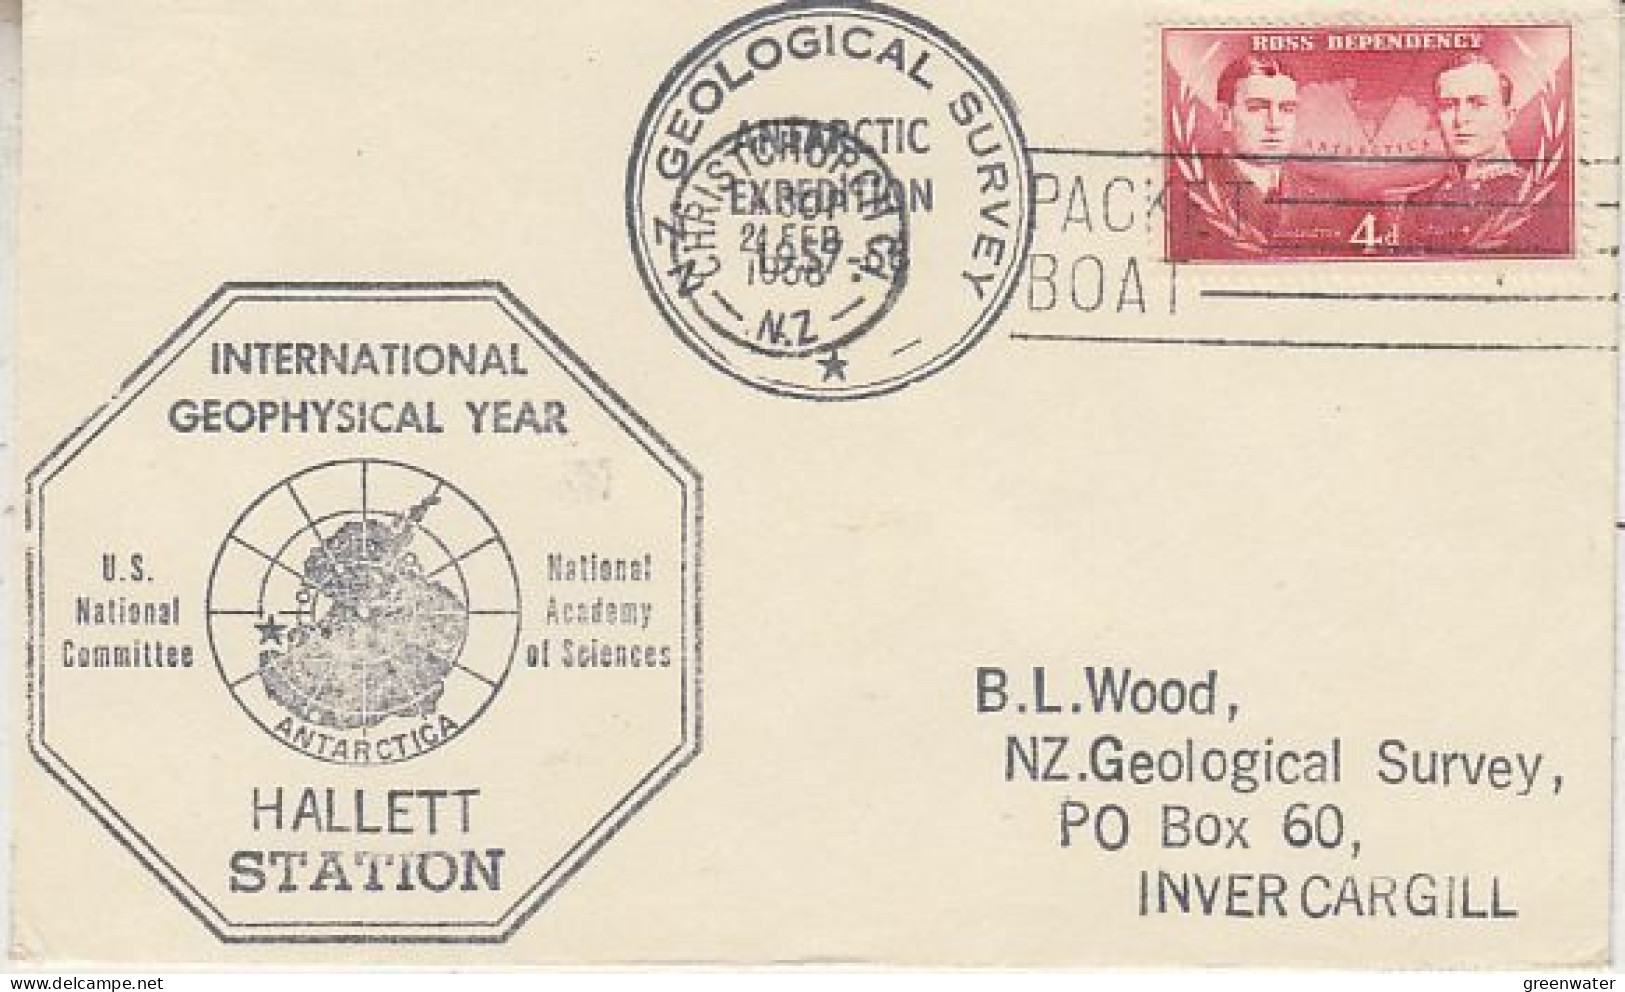 Ross Dependency NZ Antarctic Research Expedition Cape Hallet IGY Ca Scott Base 24 FEB 1958 (RO172) - Briefe U. Dokumente